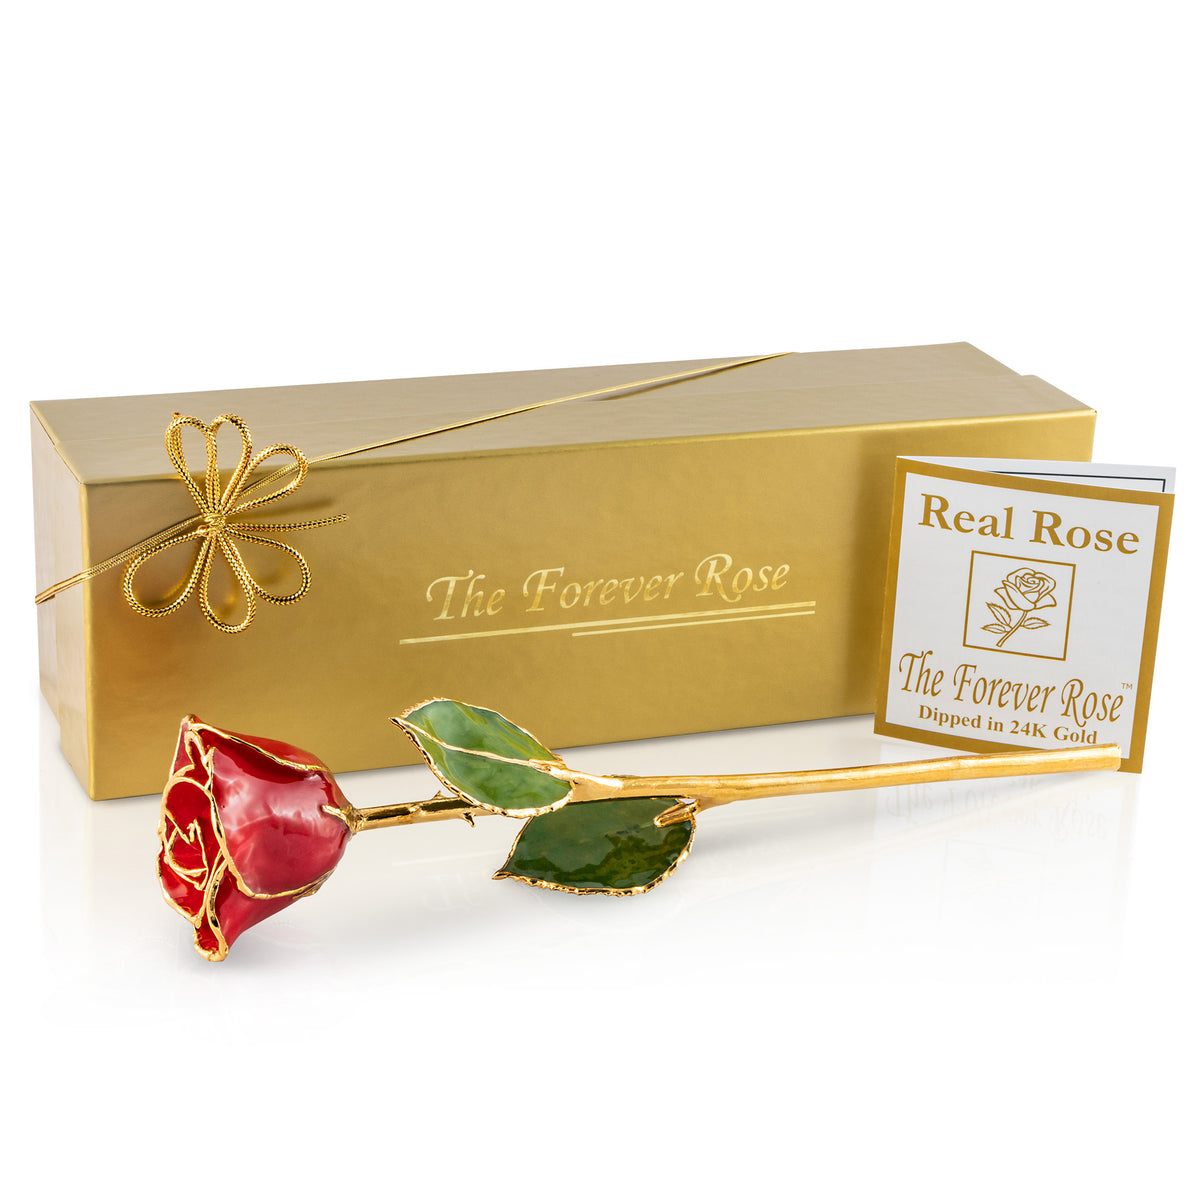 The Forever Rose - Official Site